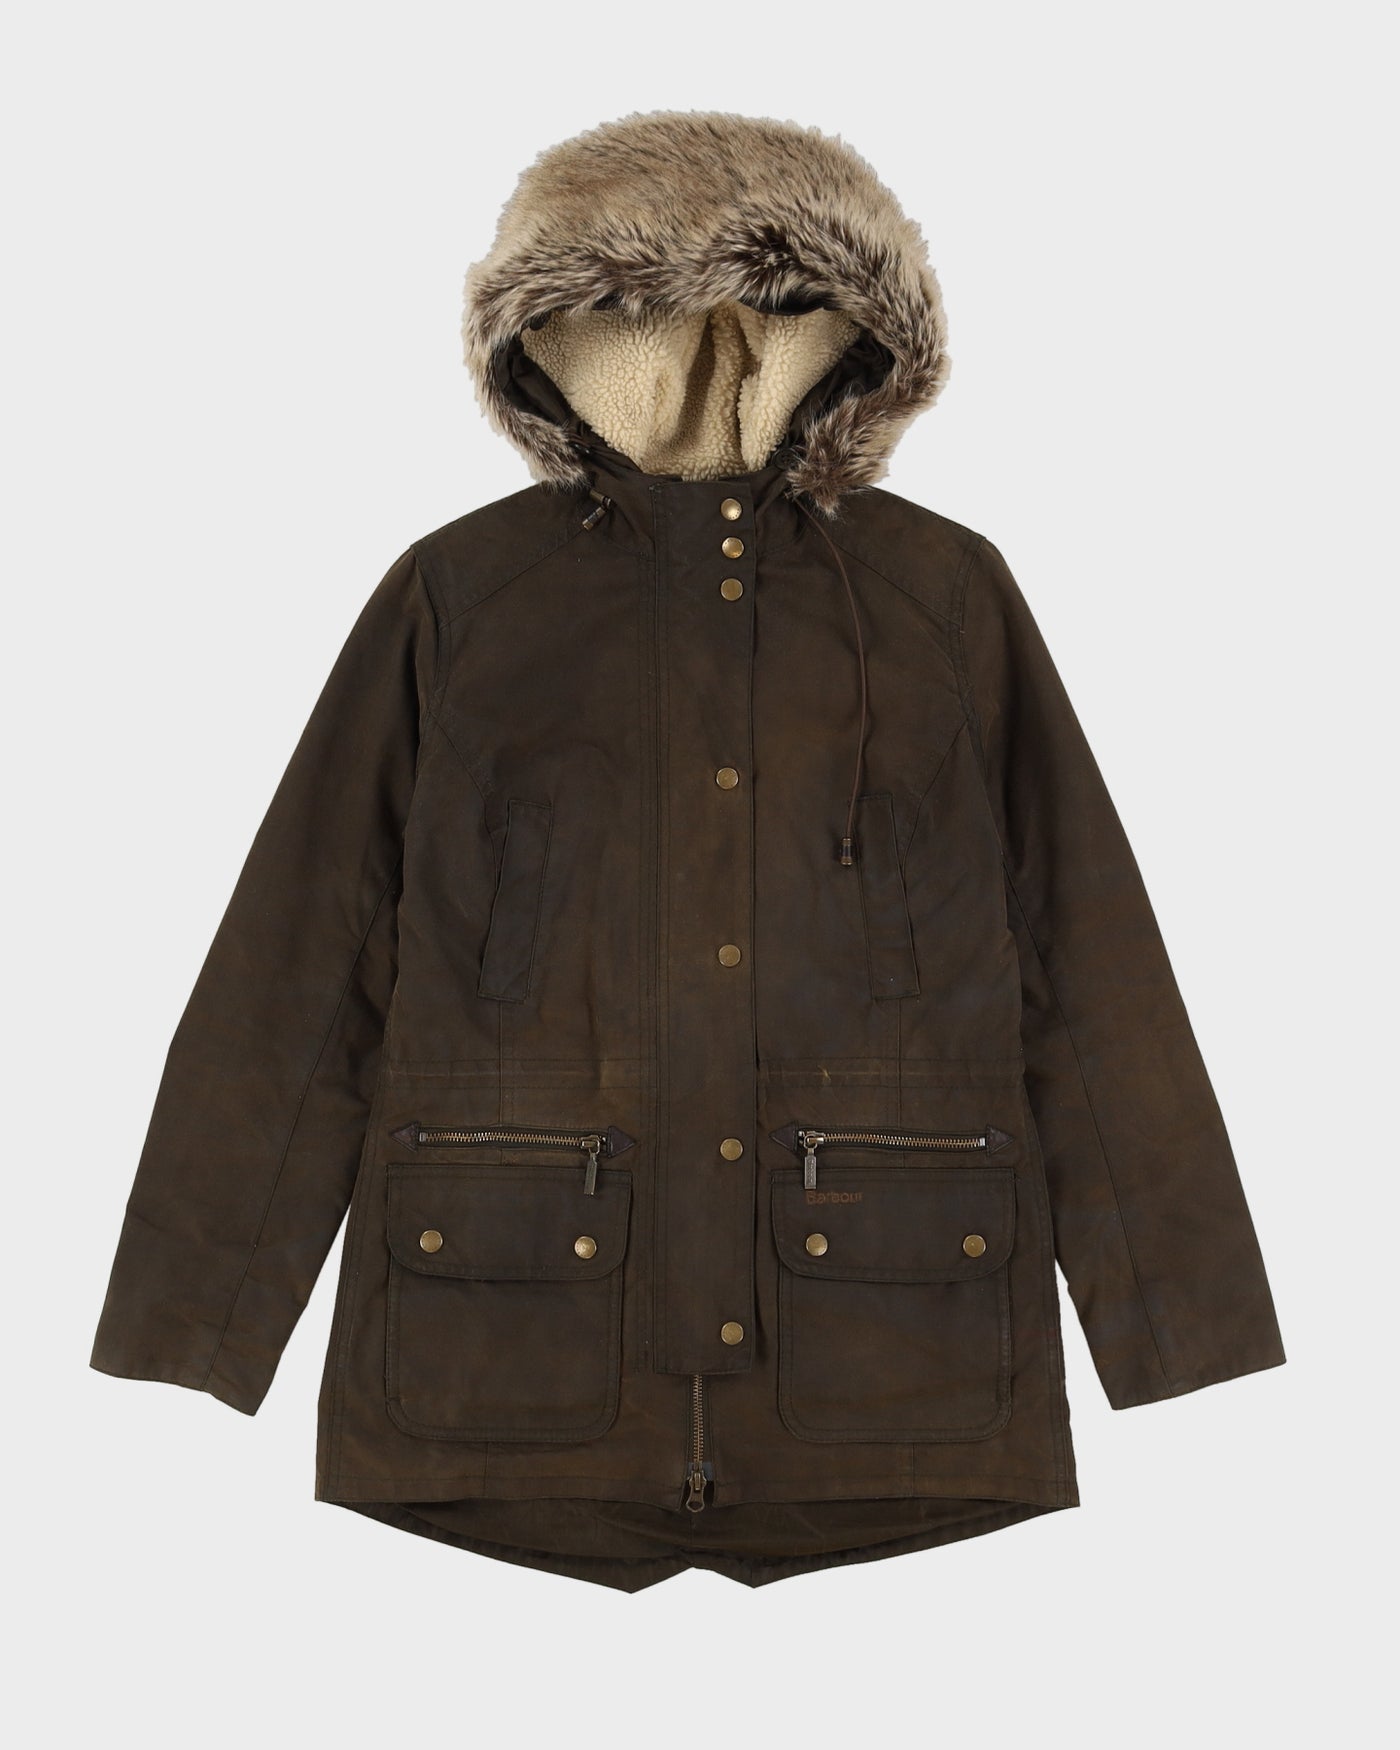 Barbour Green Hooded Jacket - S